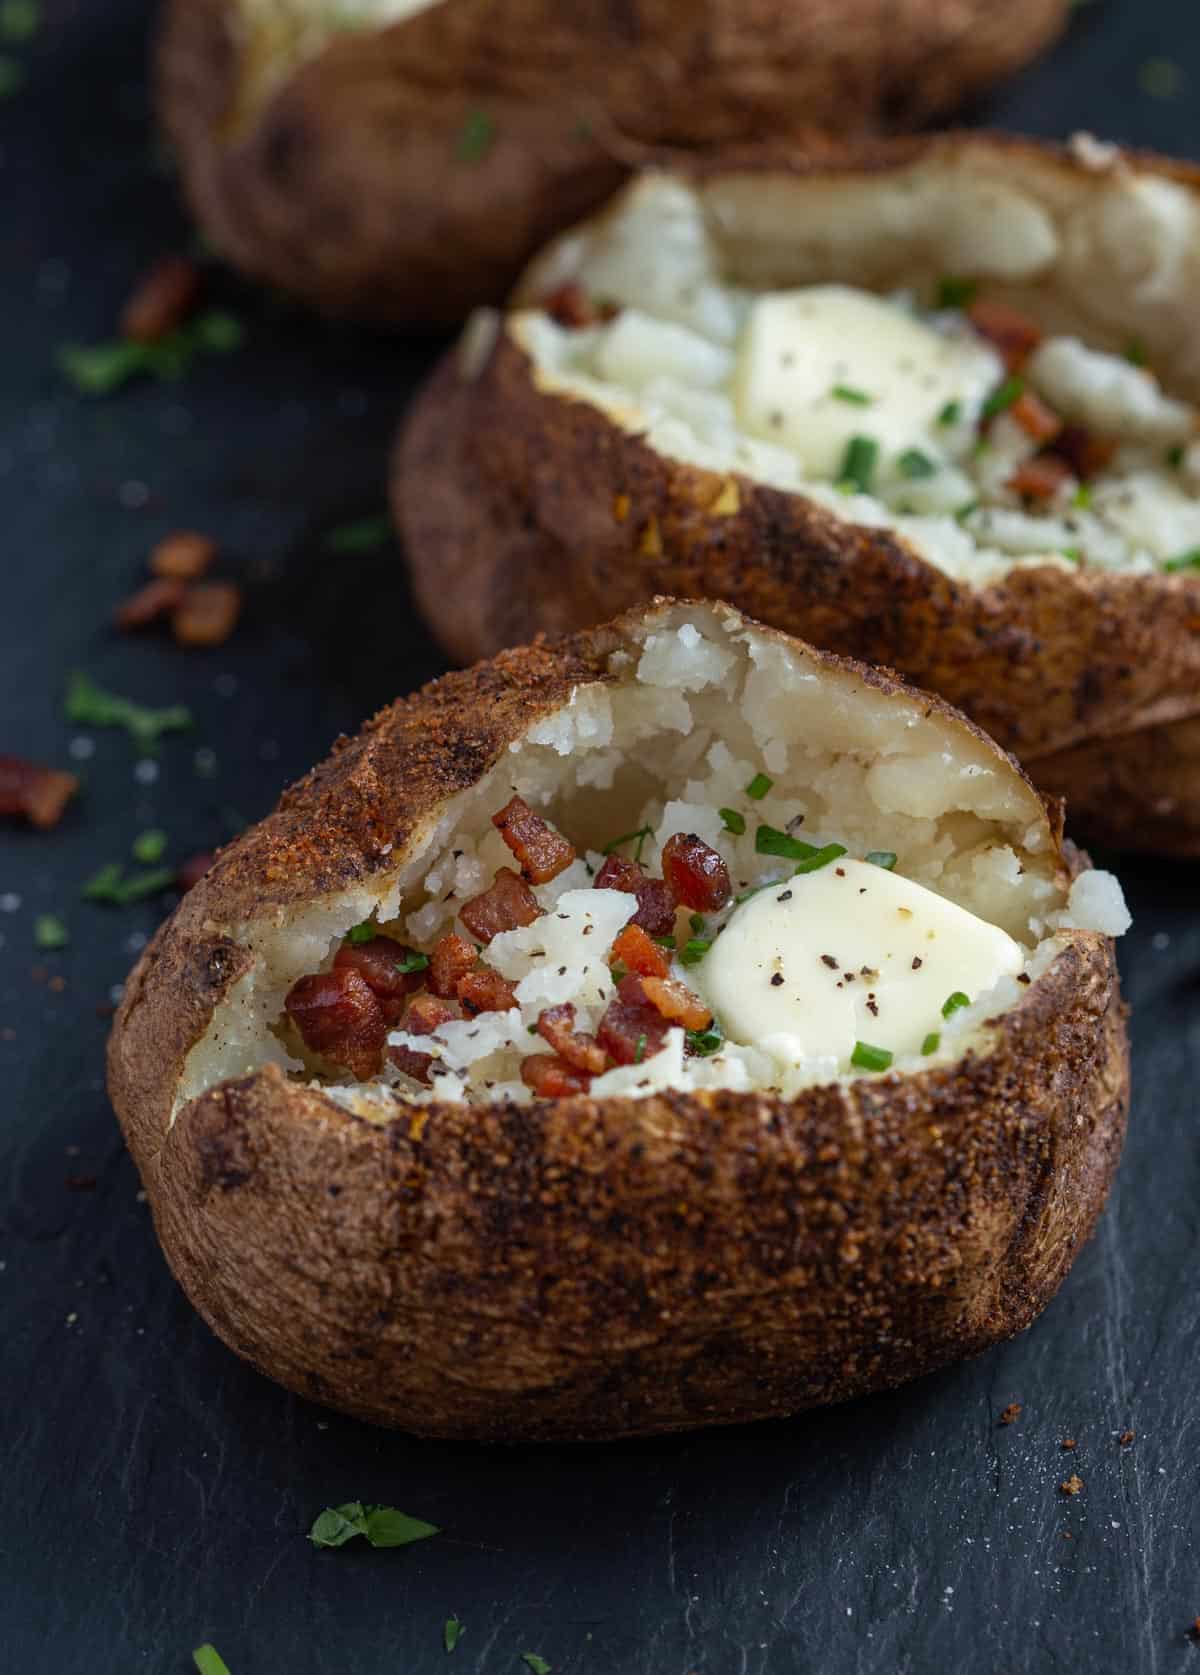 A smoked baked potato topped with bacon, butter, and chives